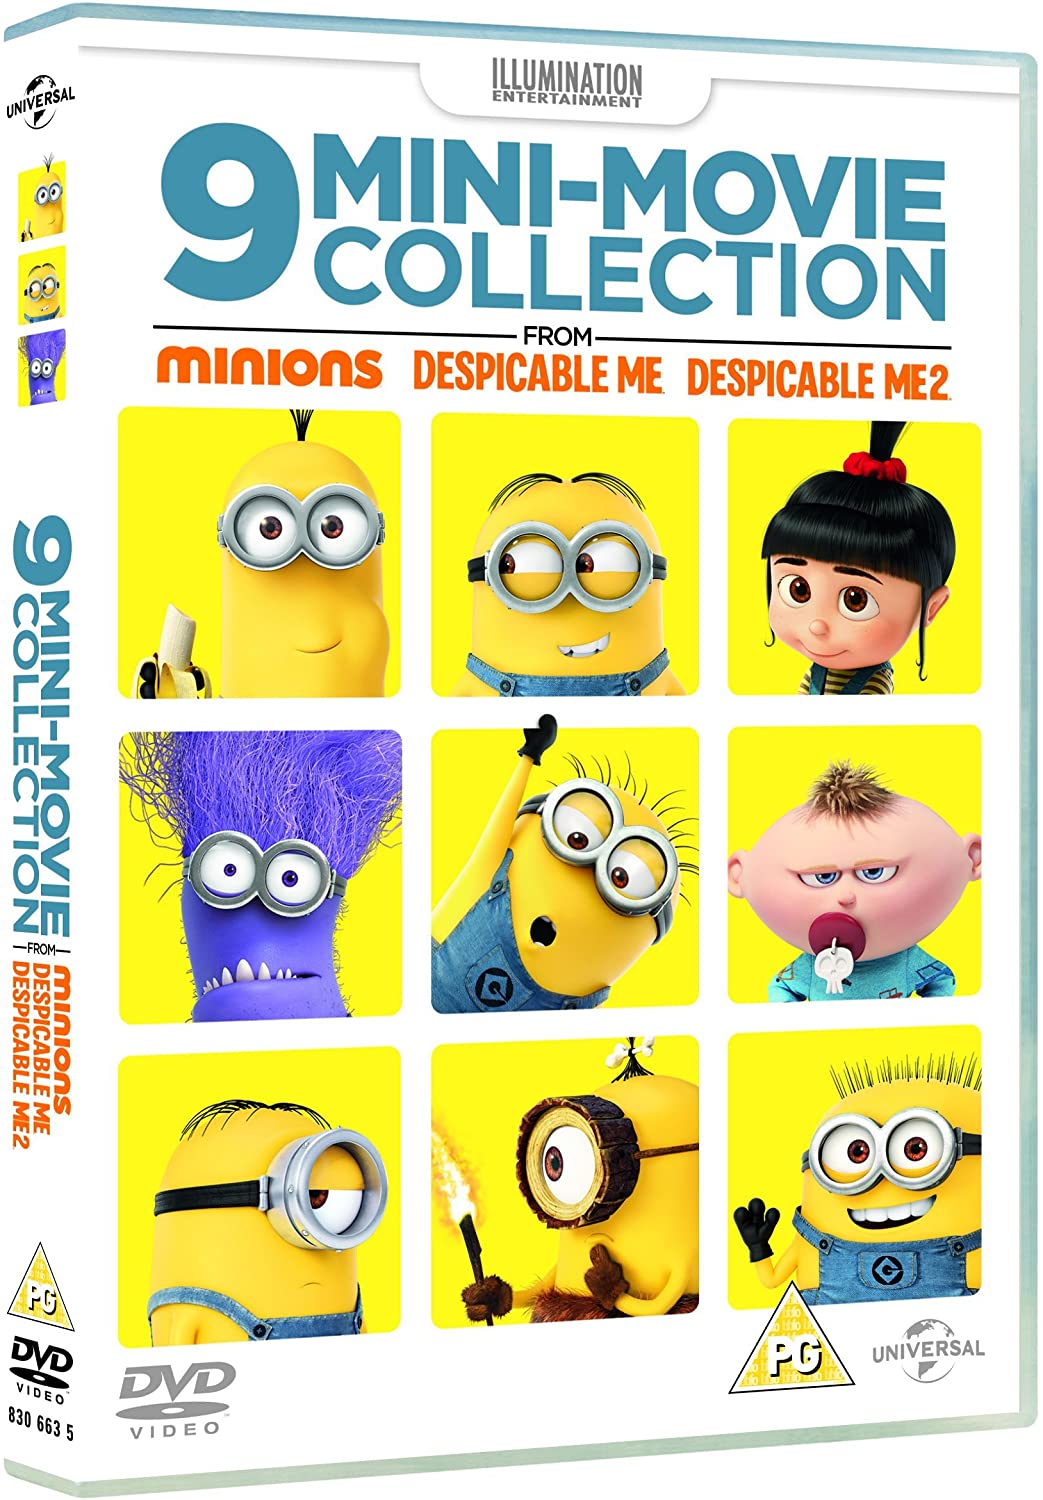 9 Mini-Movie Collection From Minions, Despicable Me 1 & 2 [DVD]